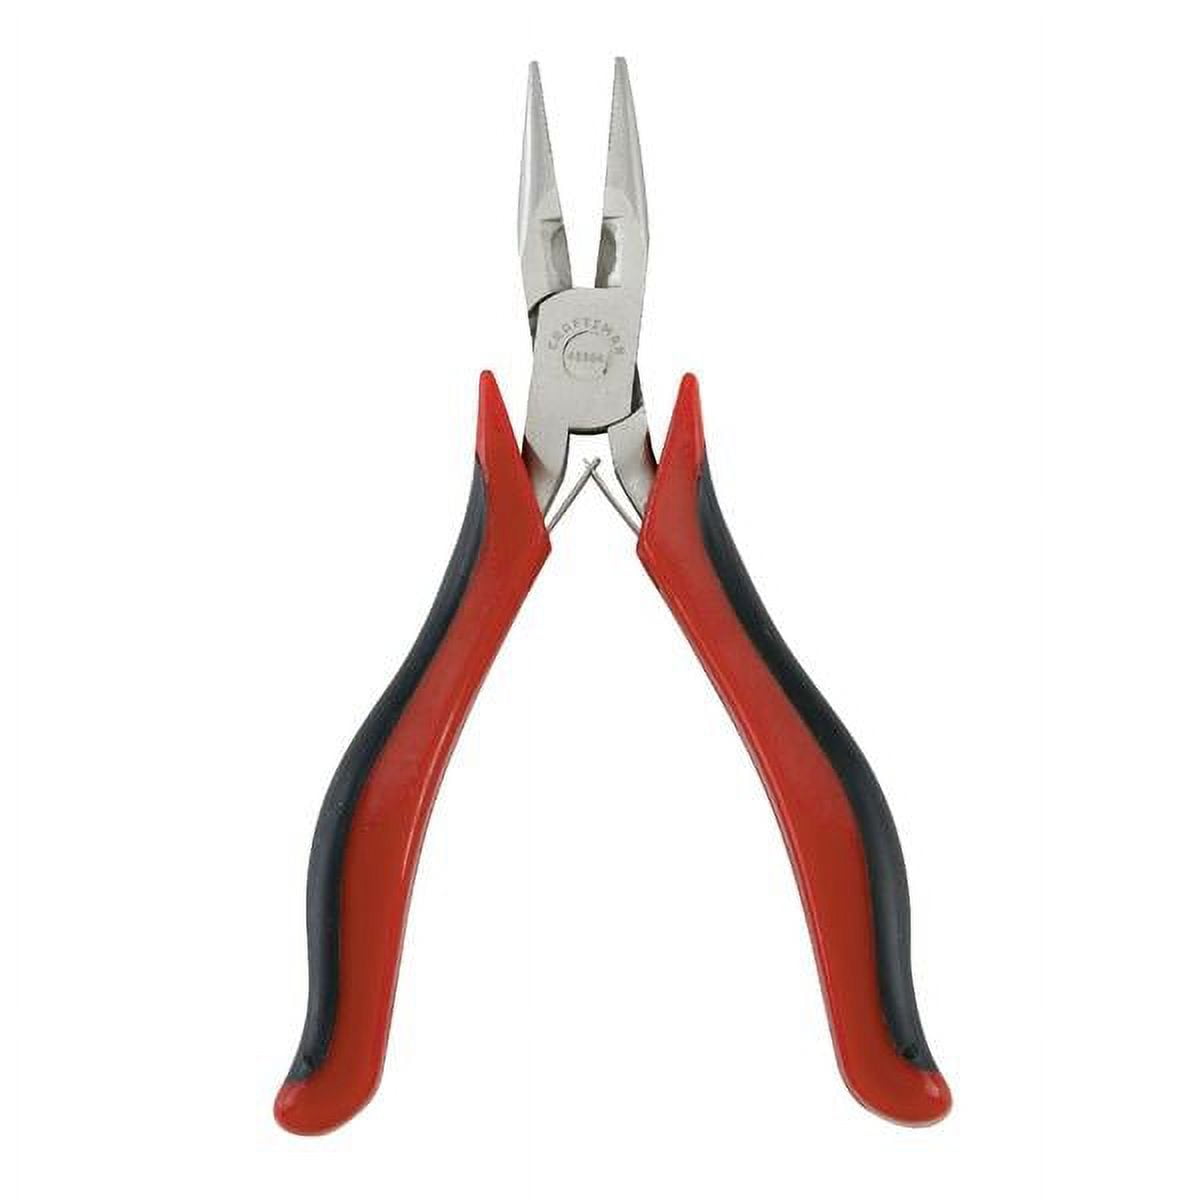 Yellow Jacket 60593 Small Pliers